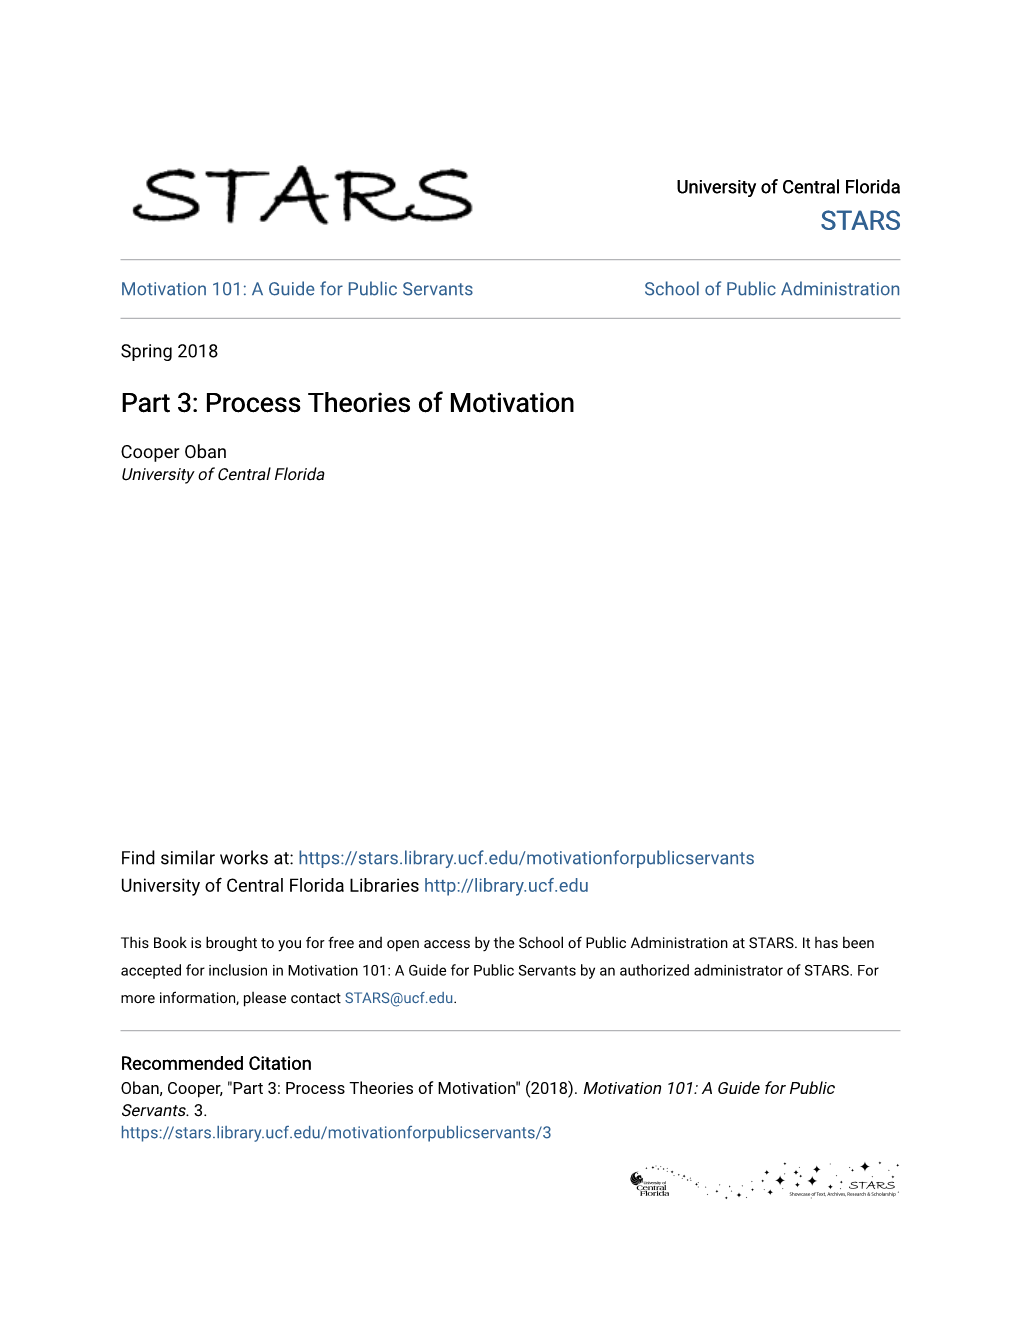 Part 3: Process Theories of Motivation